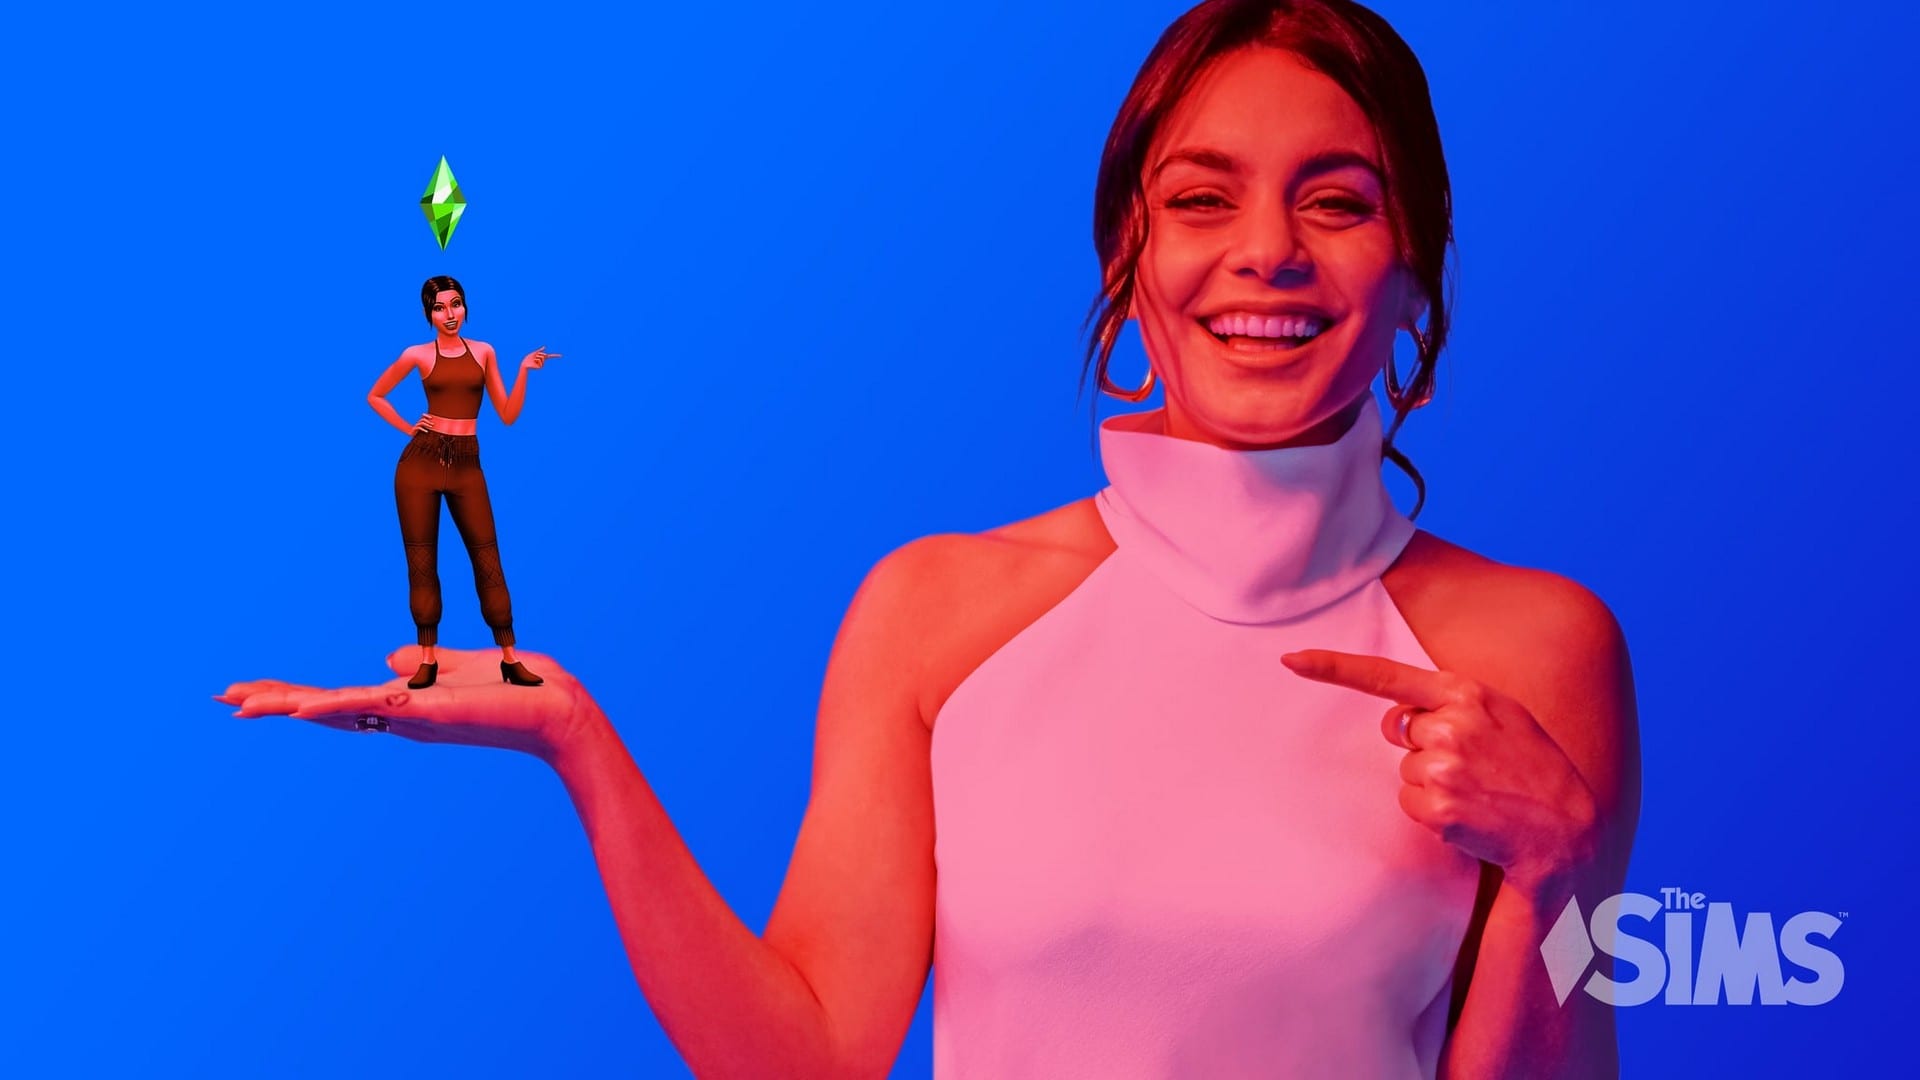 The Sims and Vanessa Hudgens Celebrate 20 Years of Playing with Life